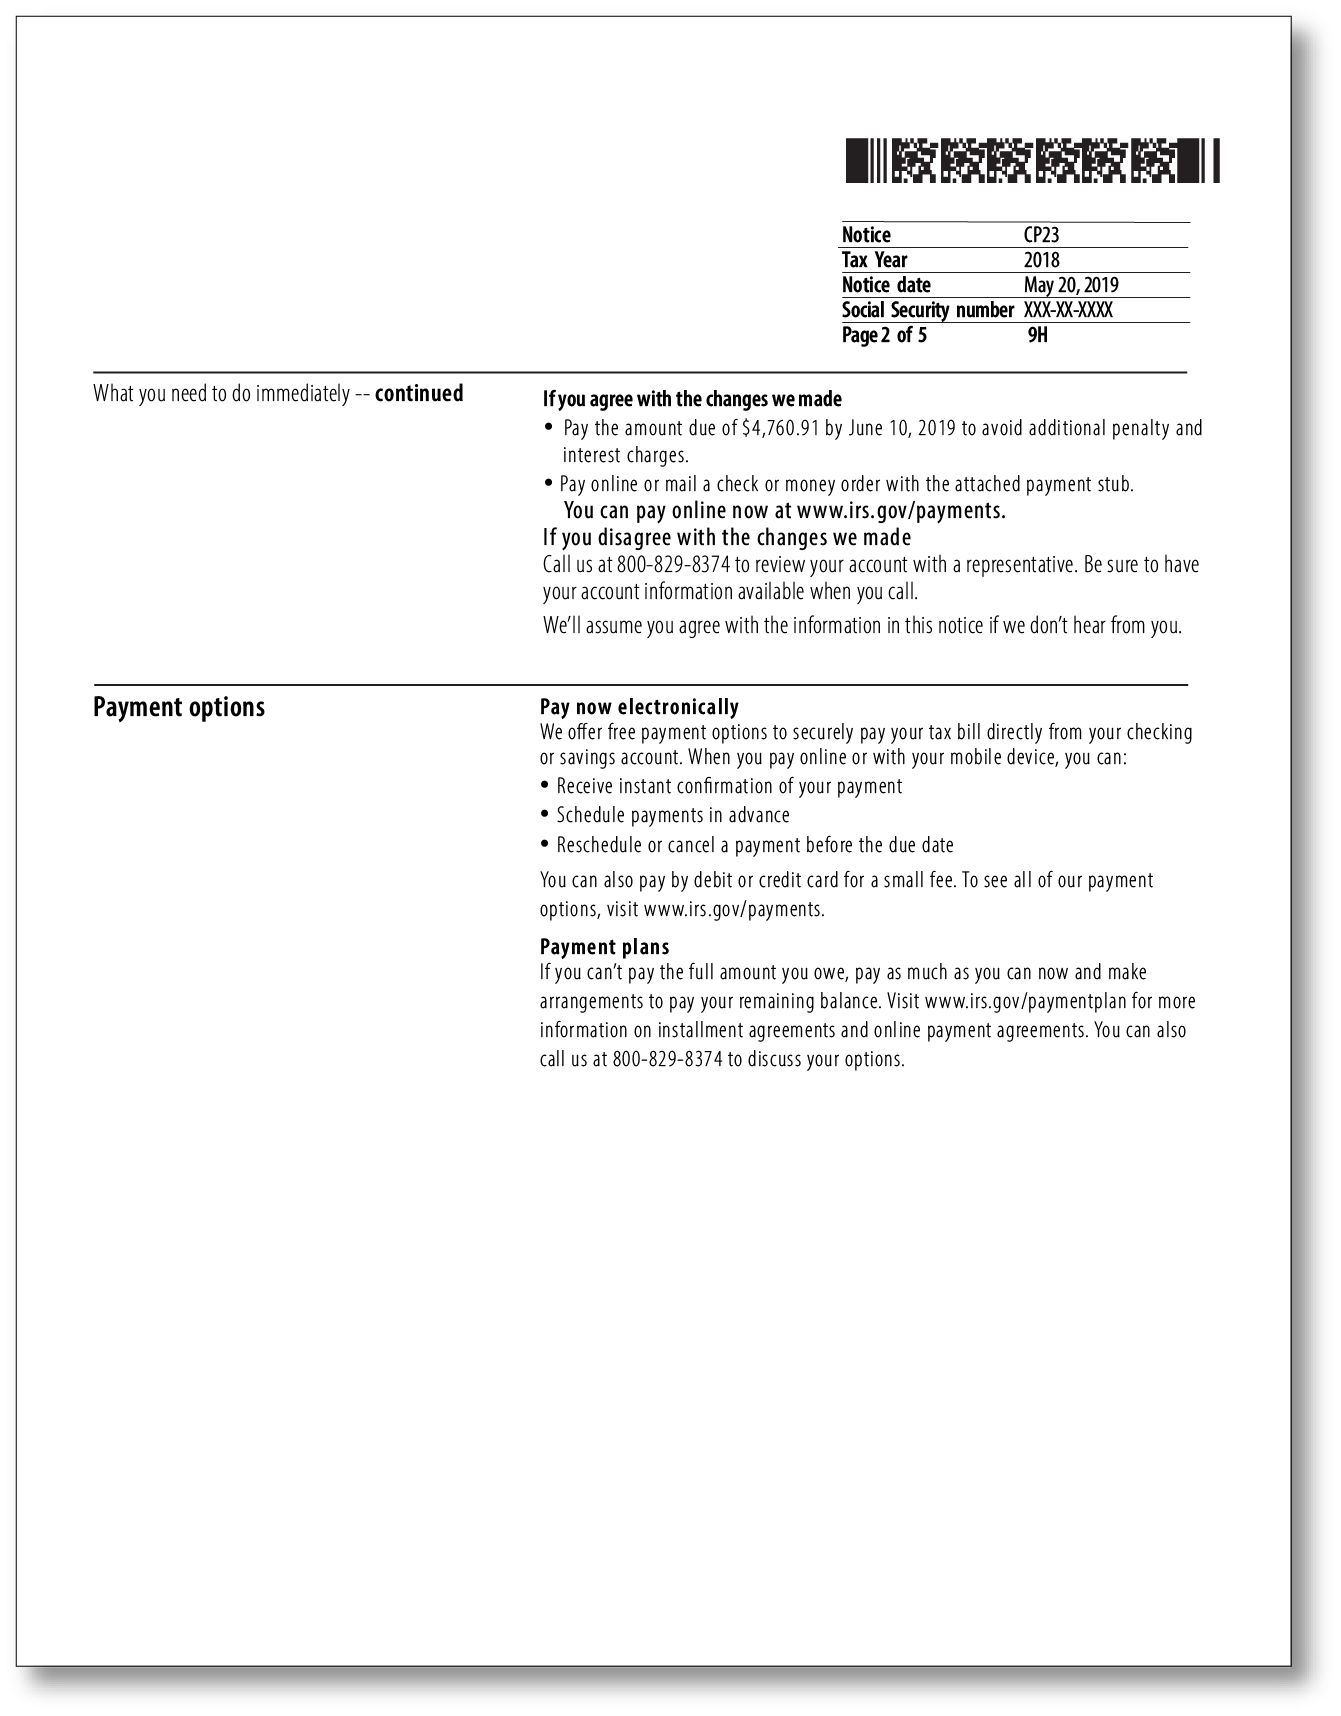 IRS Audit Letter CP23 – Sample 1